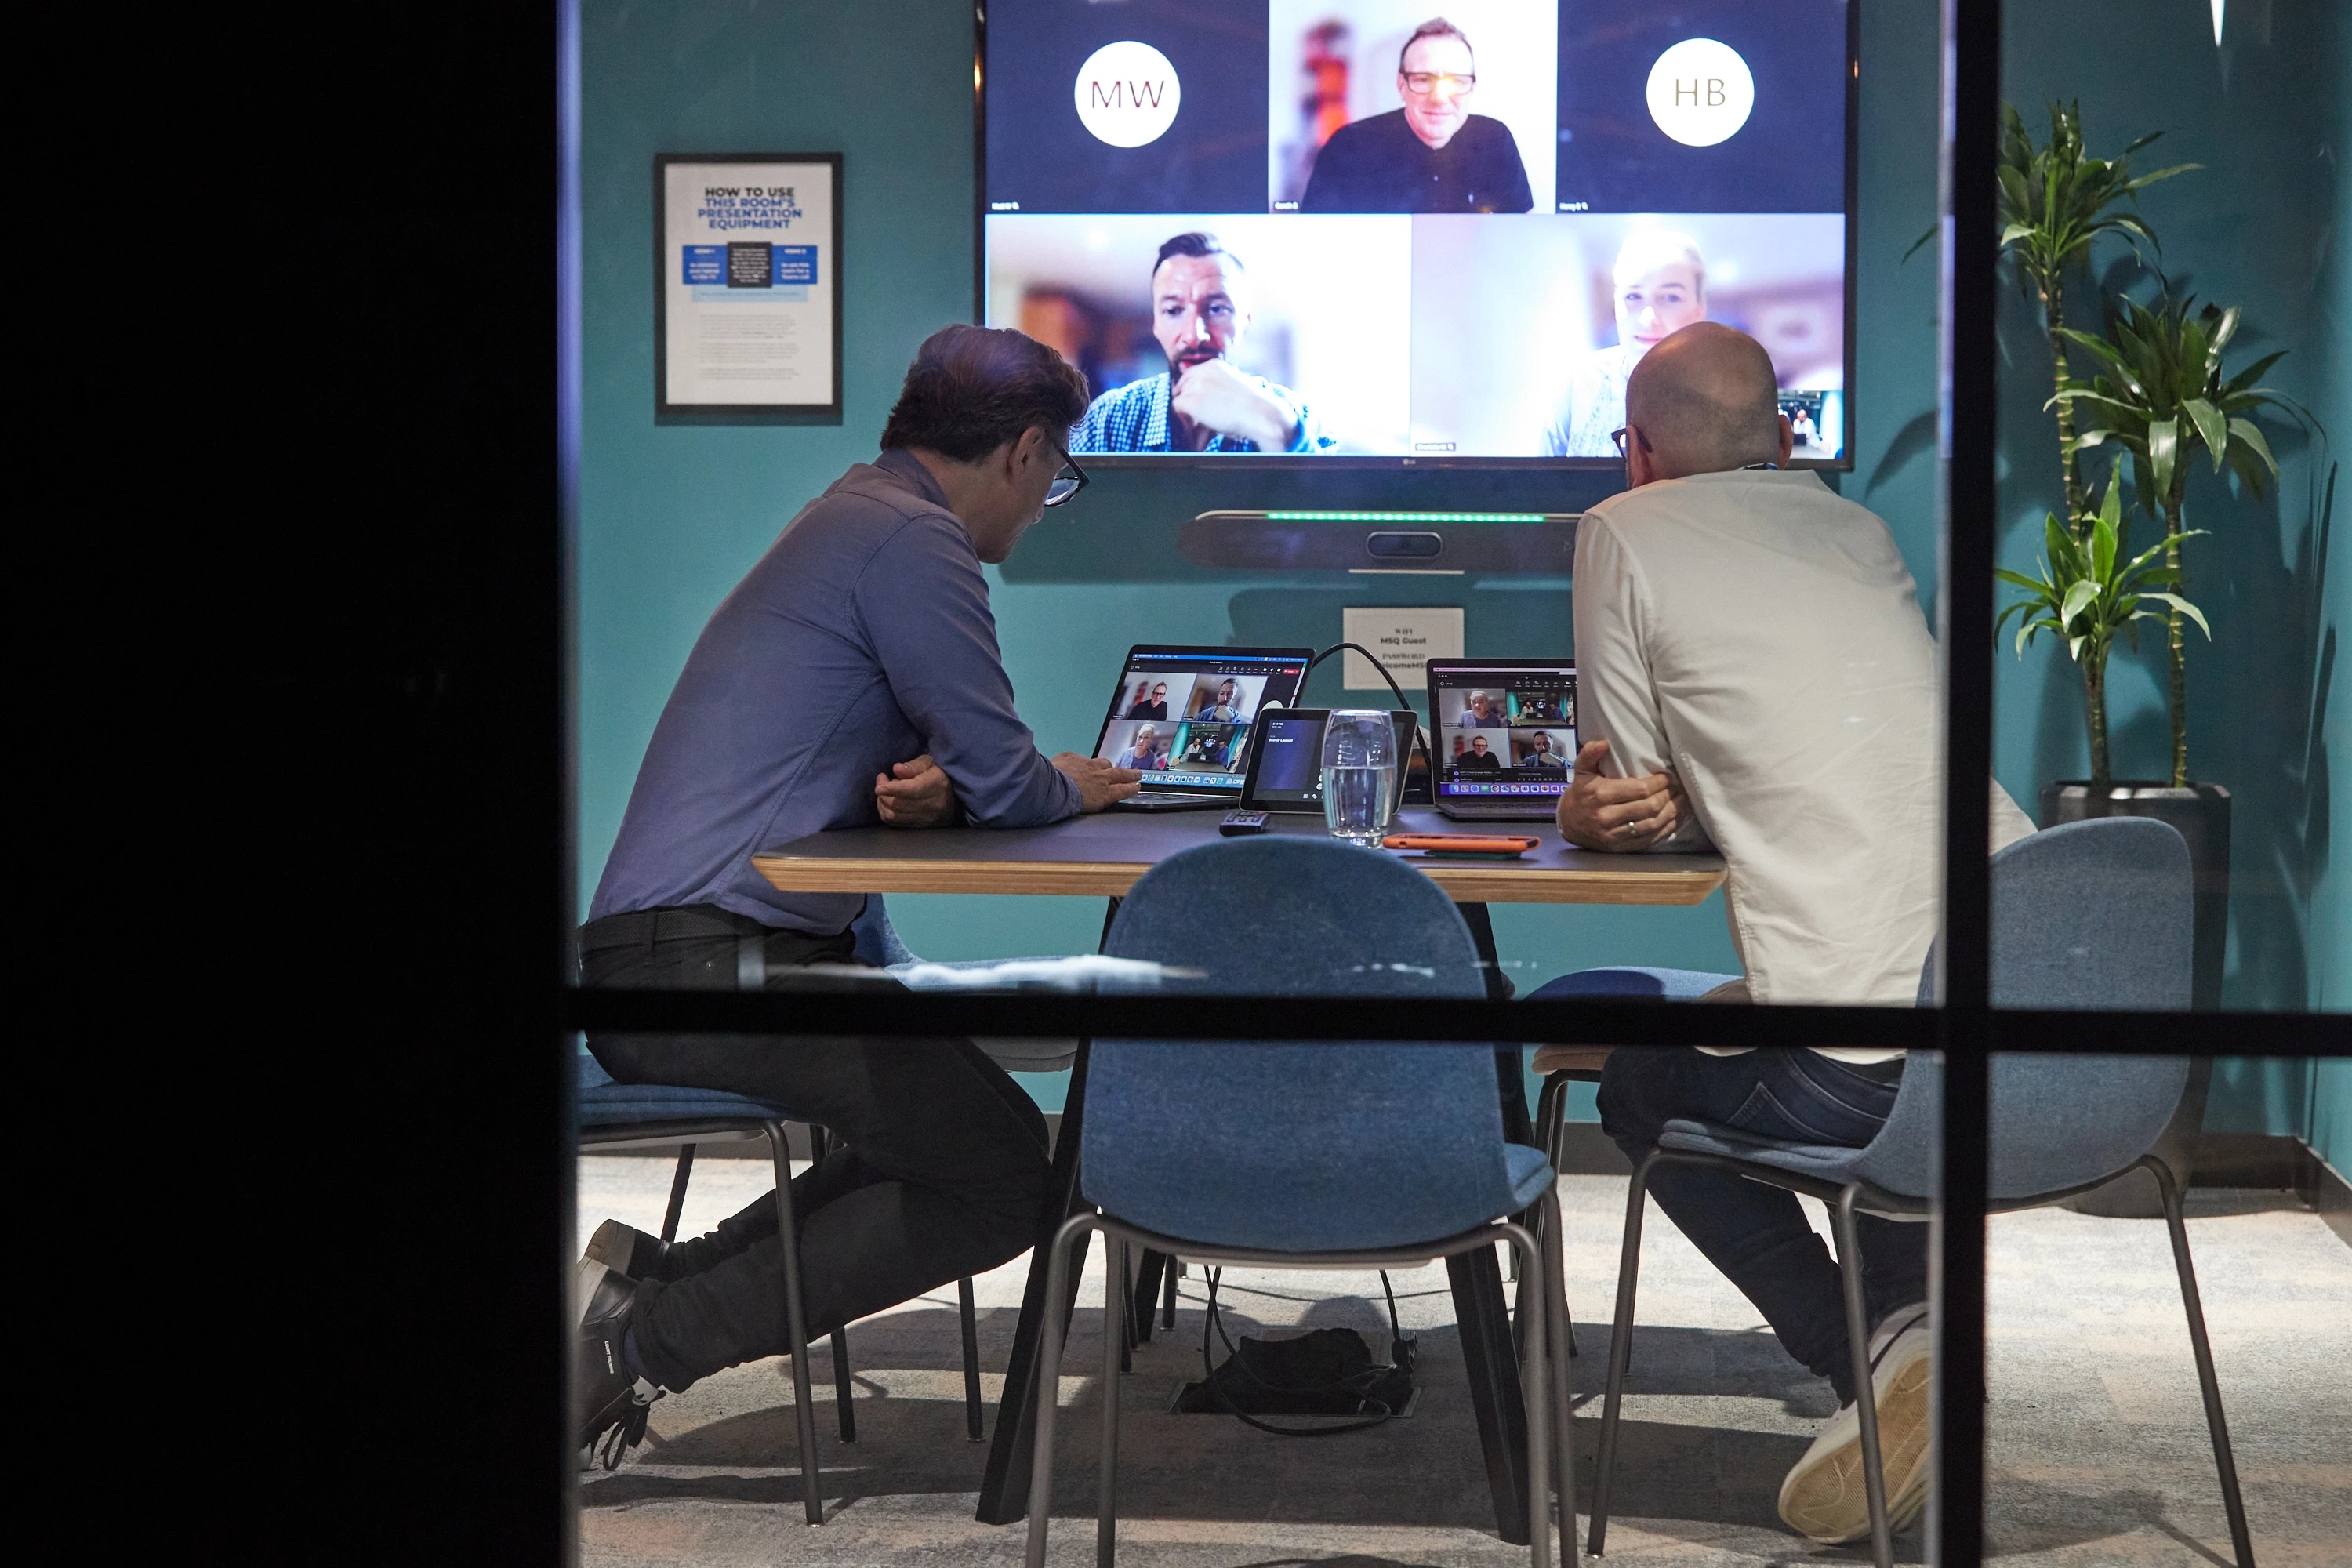 A photo of five co-workers in a meeting room. Tow of them are in the room, while three are on the large screen on the wall, joining remotely.